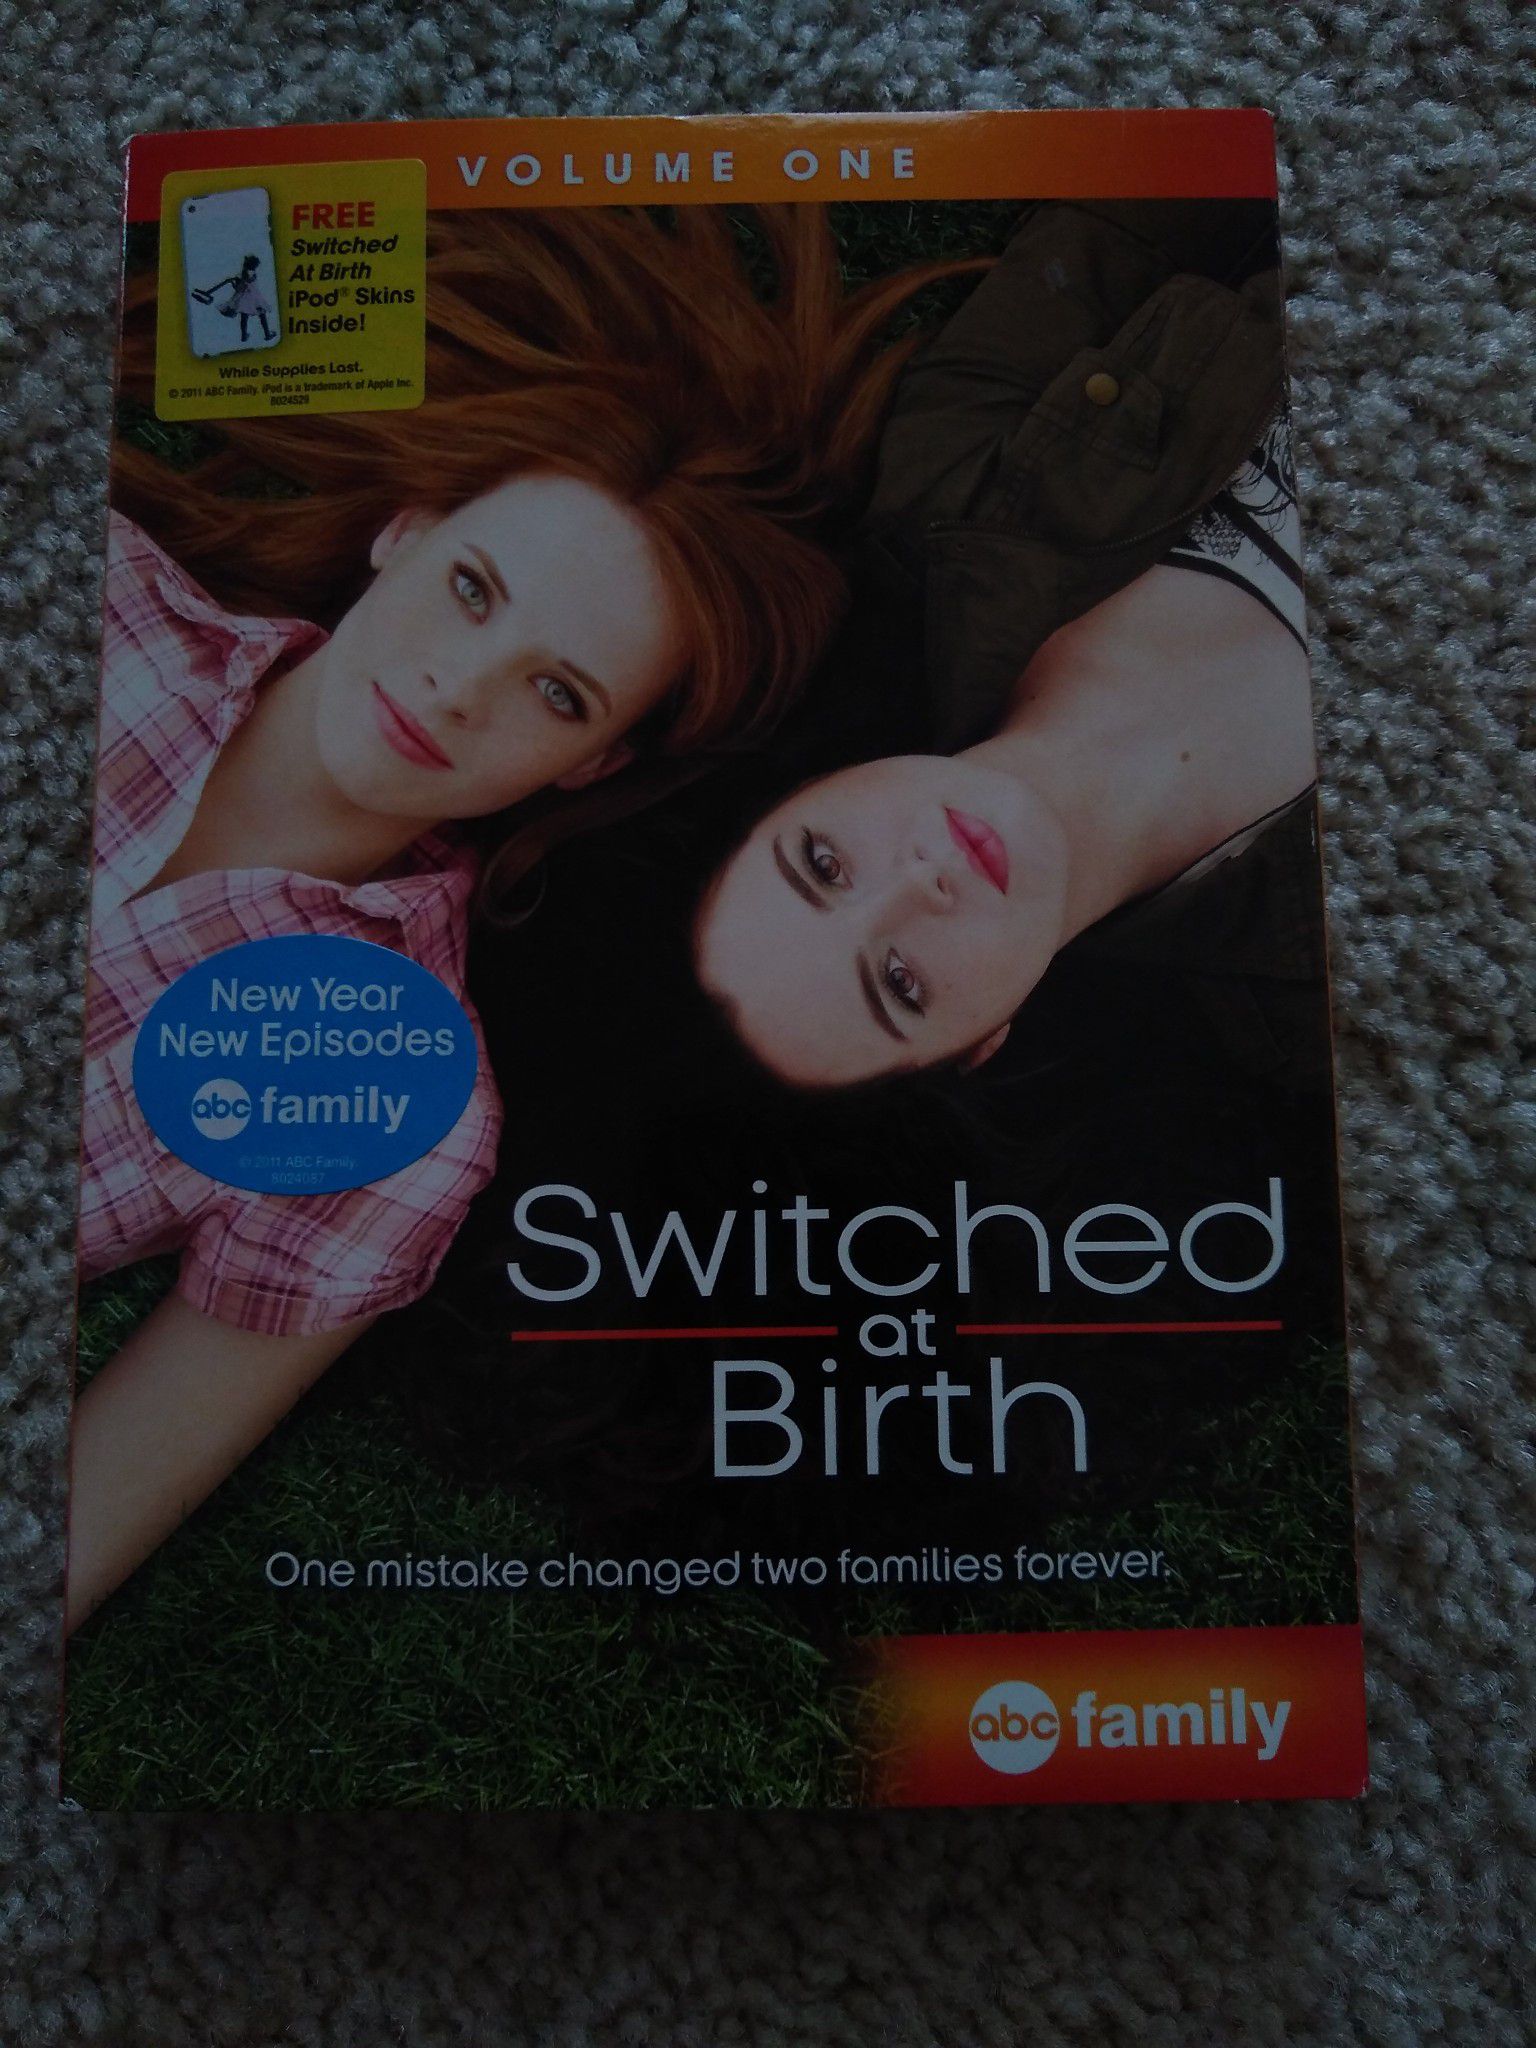 Switched at Birth, Vol. 1 (DVD, 2011, 2-Disc Set). Condition is Like New.